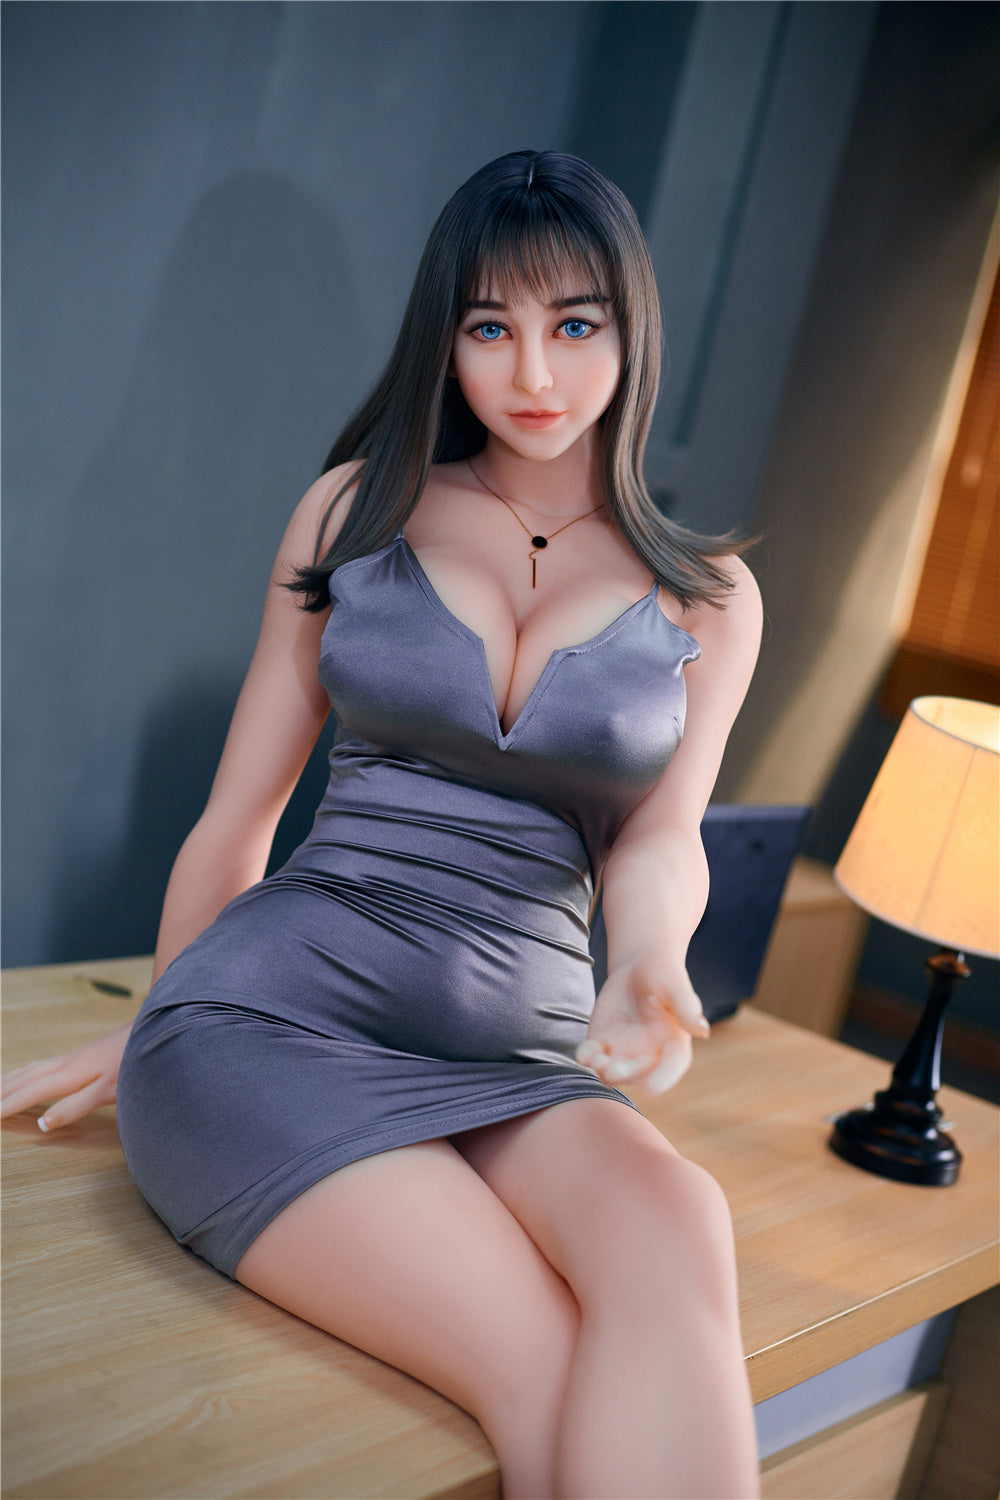 US Stock - Irontechdoll Molly 161cm #58 Big Boobs TPE Sex Doll Realistic Adult Love Doll